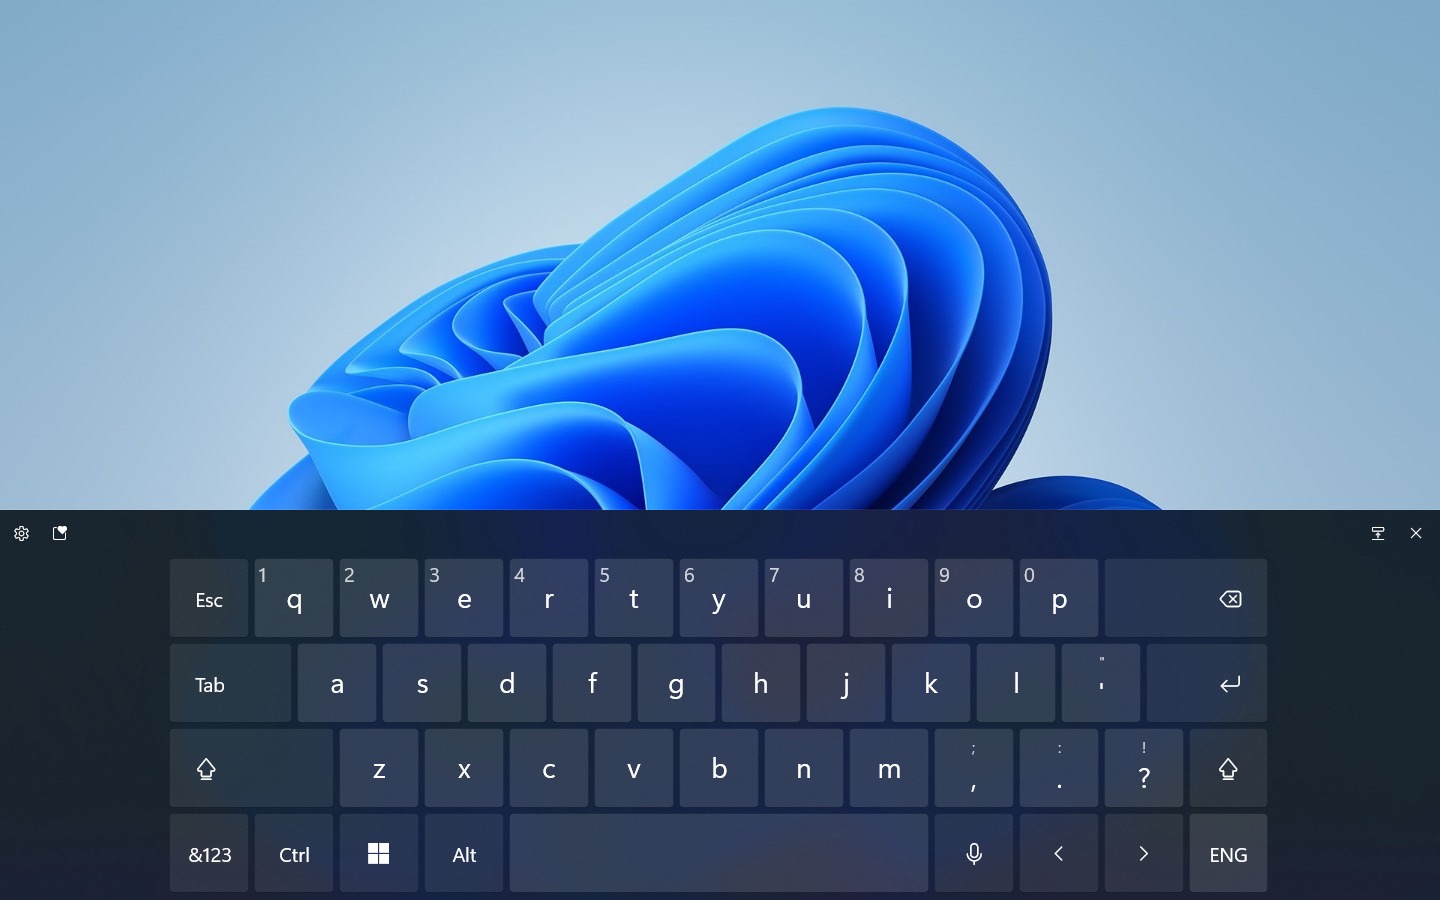 How to enable virtual keyboard or touch keyboard in Windows 11?